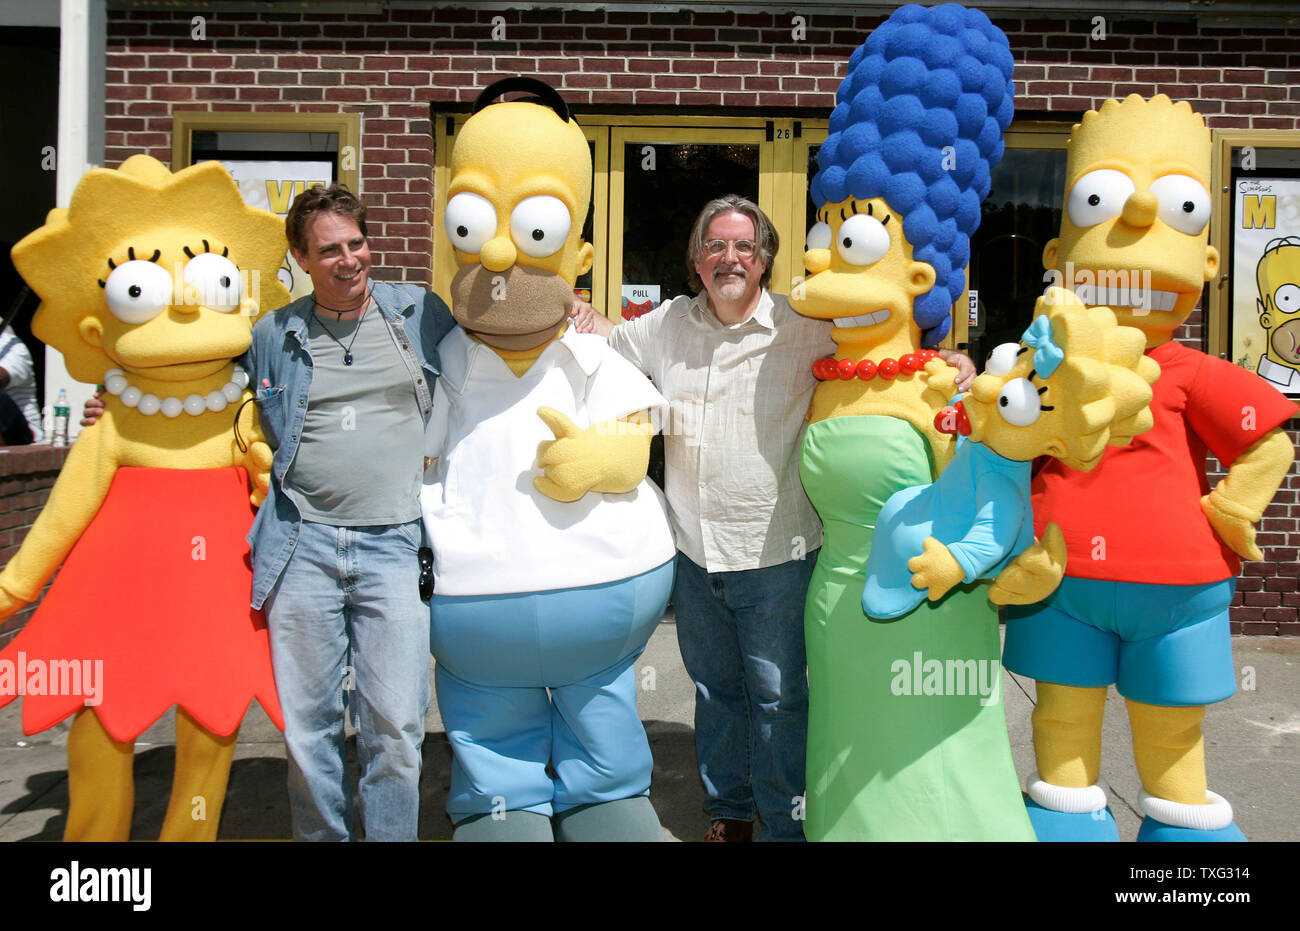 'The Simpsons Movie' director David Silverman (2nd L) stands with producer Matt Groening (C) and the characters from the movie at the hometown premier of 'The Simpsons Movie' at the Springfield Movie Theater in Springfield, Vermont on July 21, 2007.  From left are Lisa Simpson, David Silverman, Homer Simpson, Matt Groening, Marge Simpson, Maggie Simson, and Bart Simpson. (UPI Photo/Matthew Healey) Stock Photo